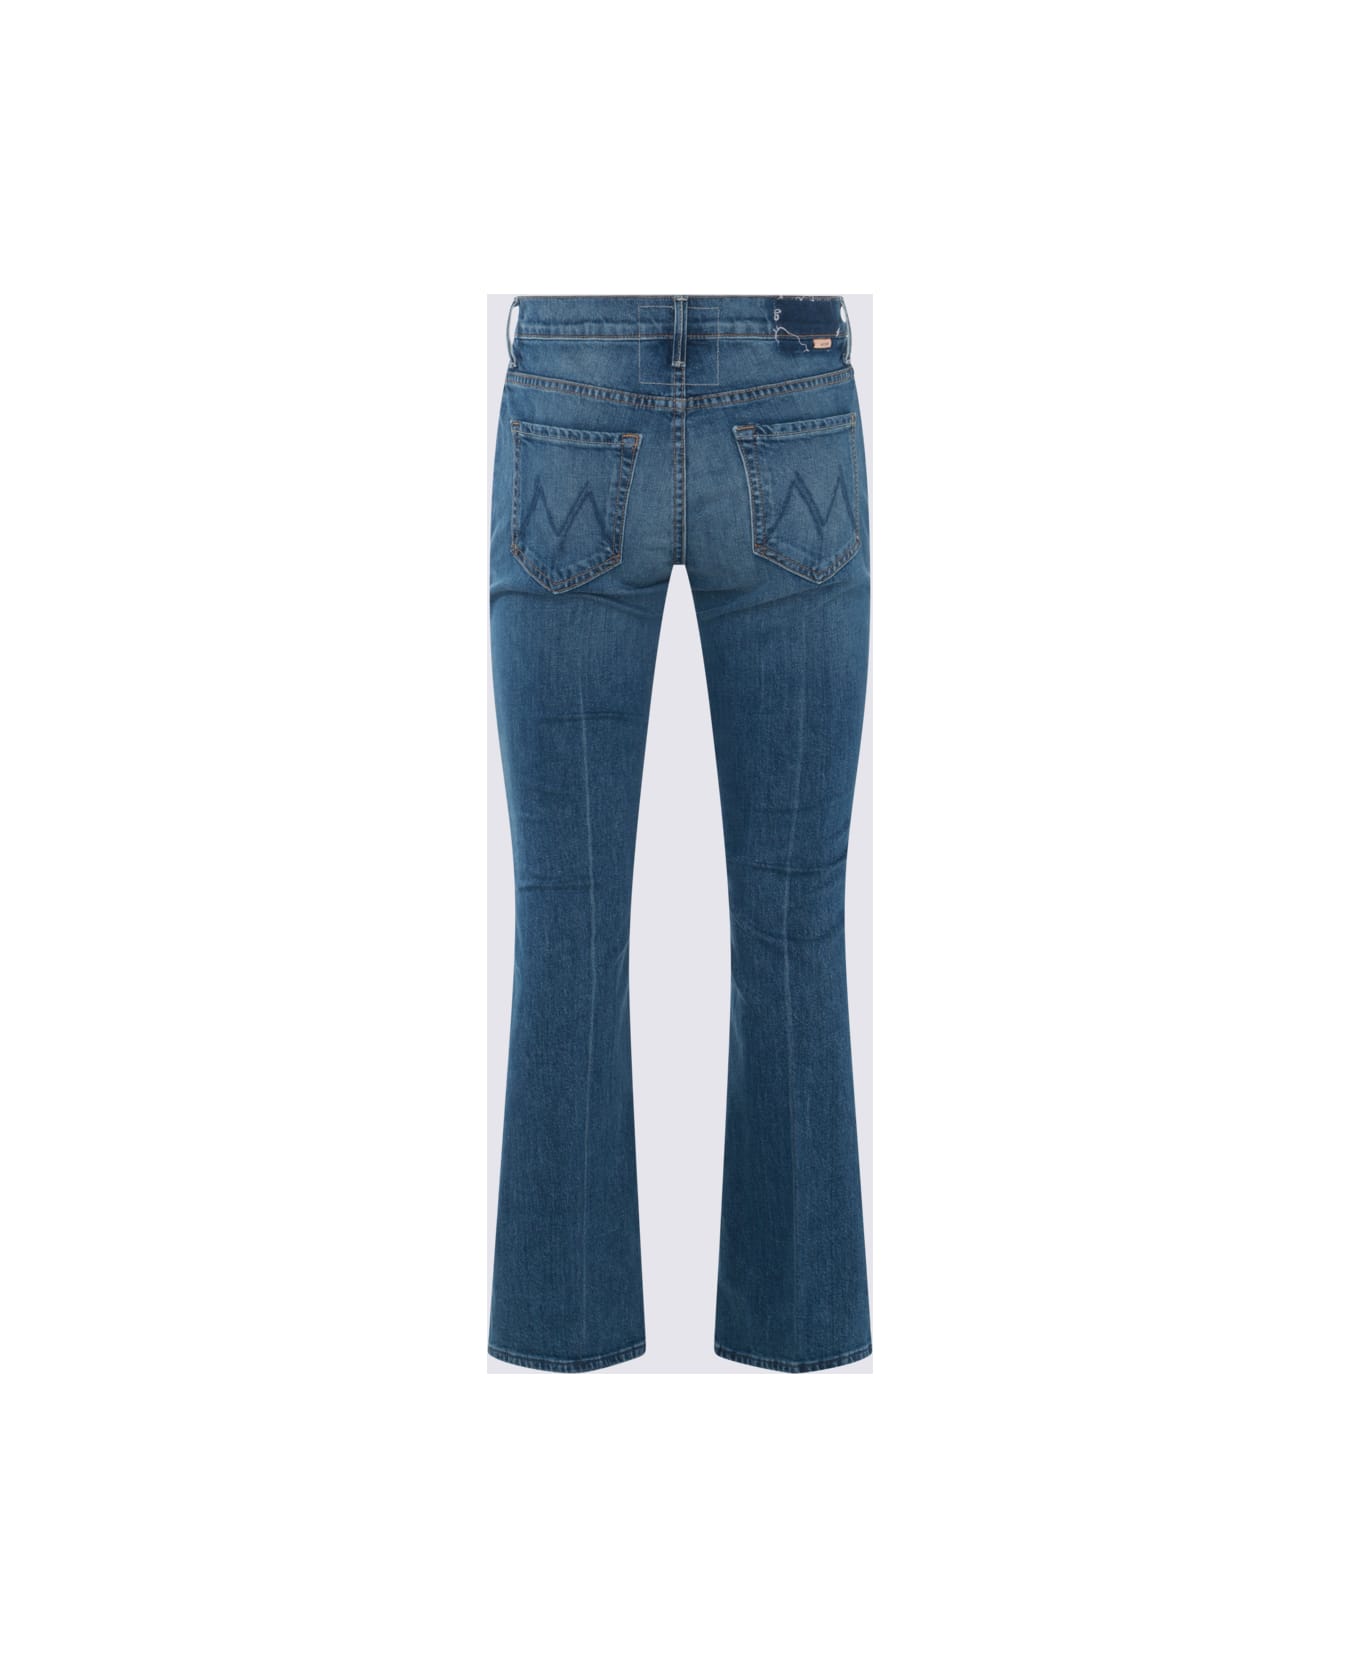 Mother Navy Blue Cotton Blend Jeans - ITS A SMALL WORLD デニム